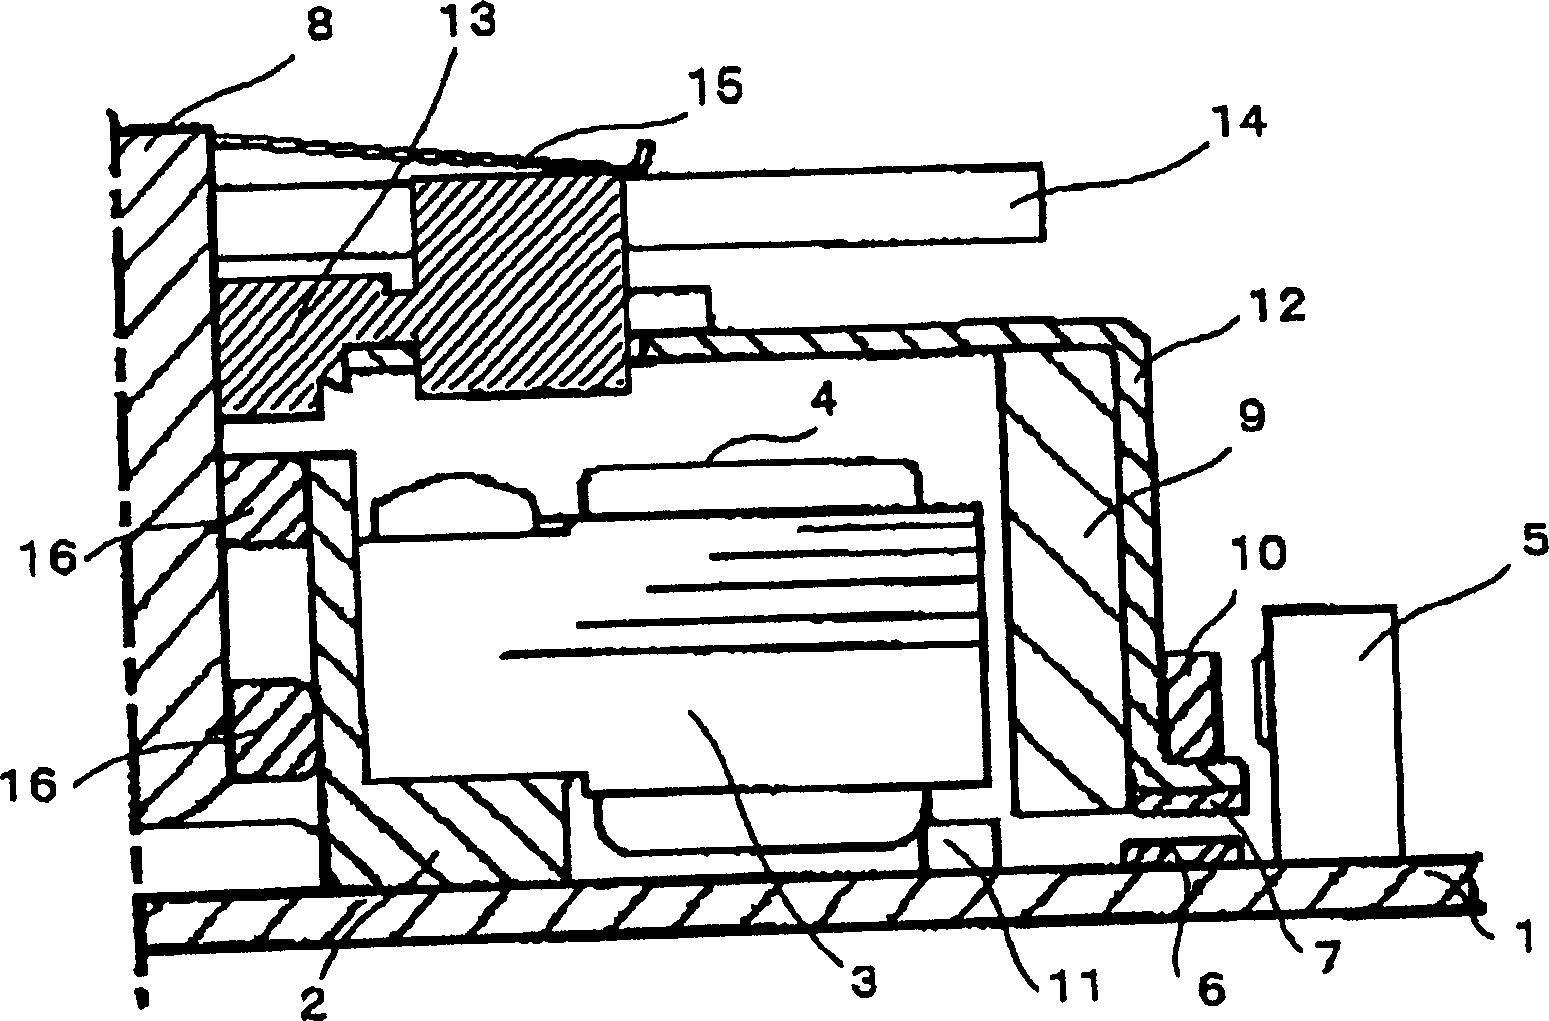 Polygon mirror drive motor and laser mirror radiation device